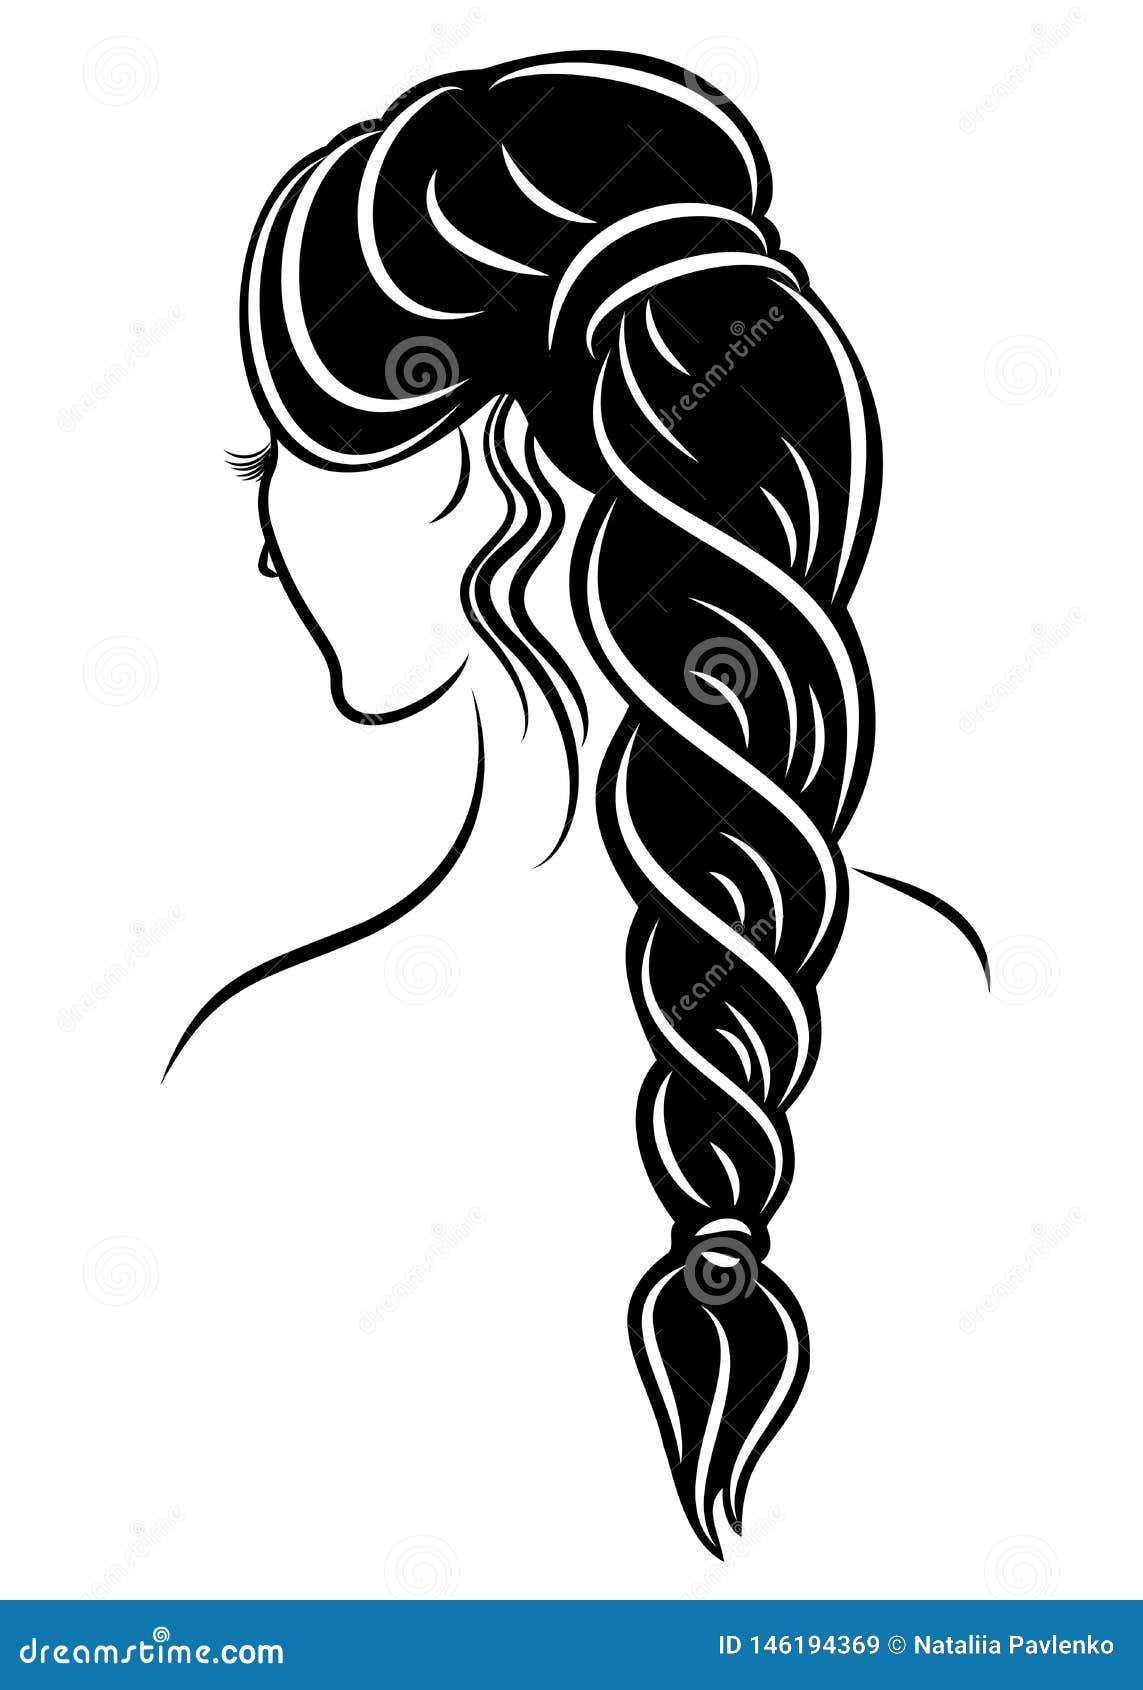 Silhouette Profile of a Cute Lady`s Head. the Girl Shows the Female  Hairstyle Braid on Medium and Long Hair. Suitable for Stock Illustration -  Illustration of black, hairstyle: 146194369